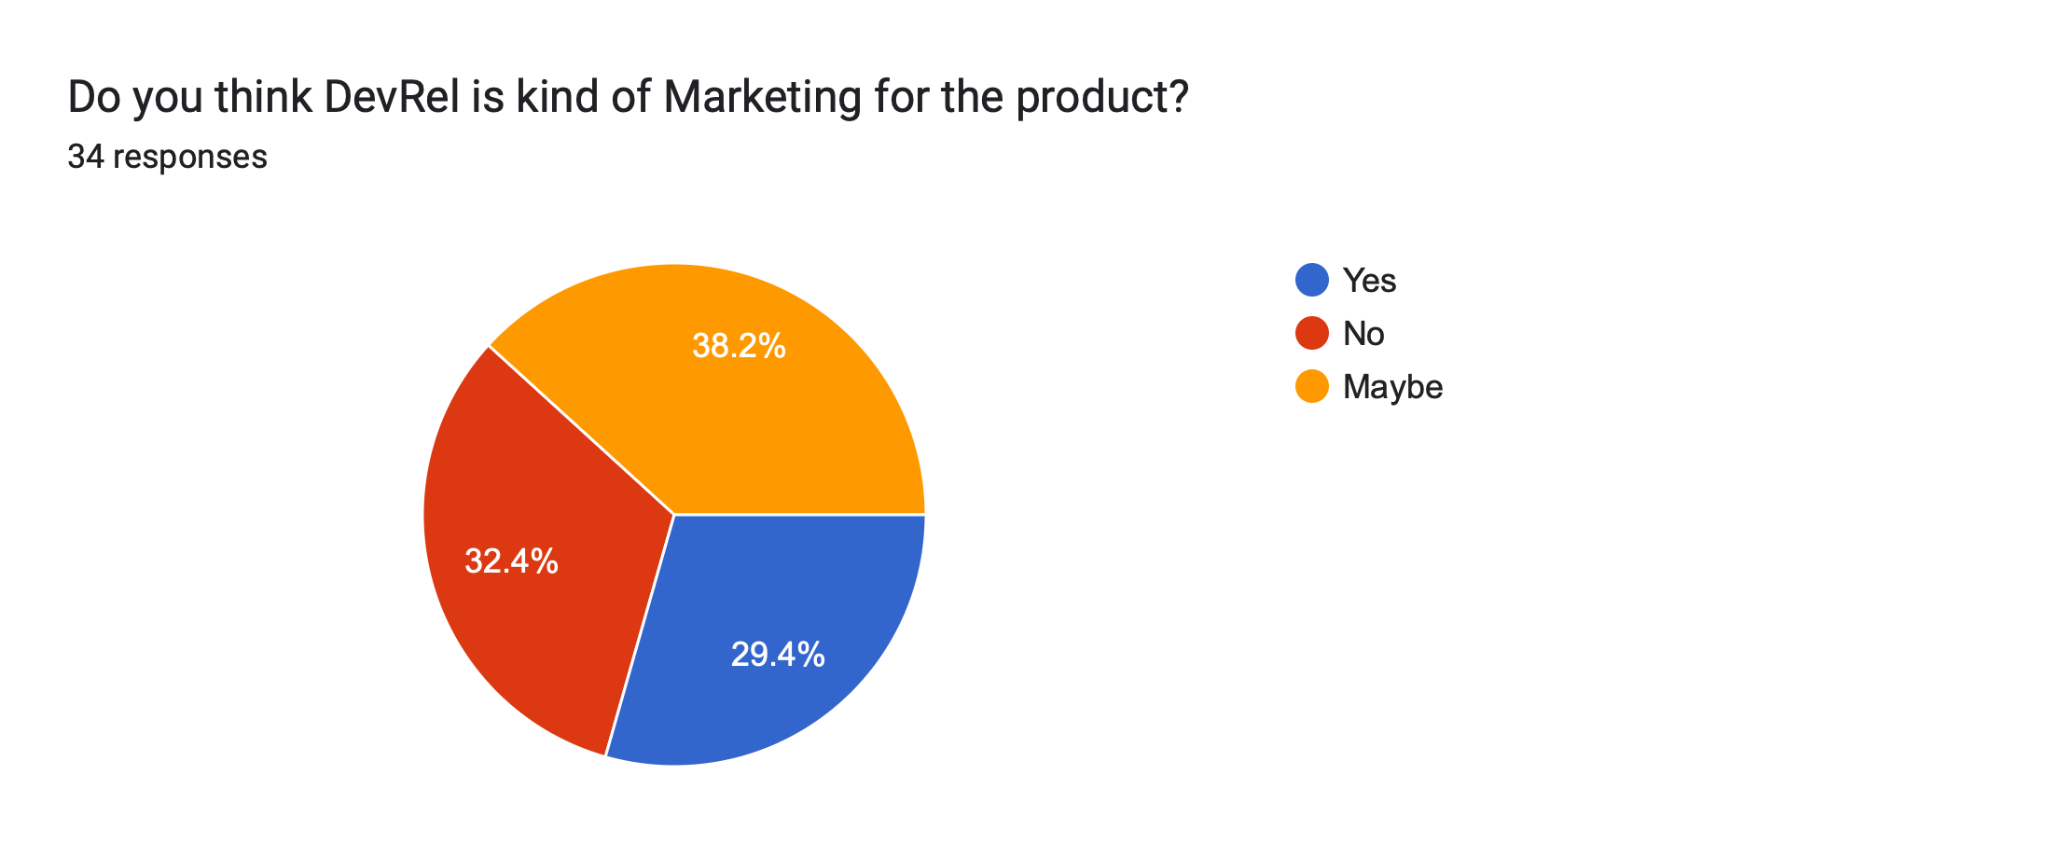 Forms response chart. Question title: Do you think DevRel is kind of Marketing for the product?. Number of responses: 34 responses.